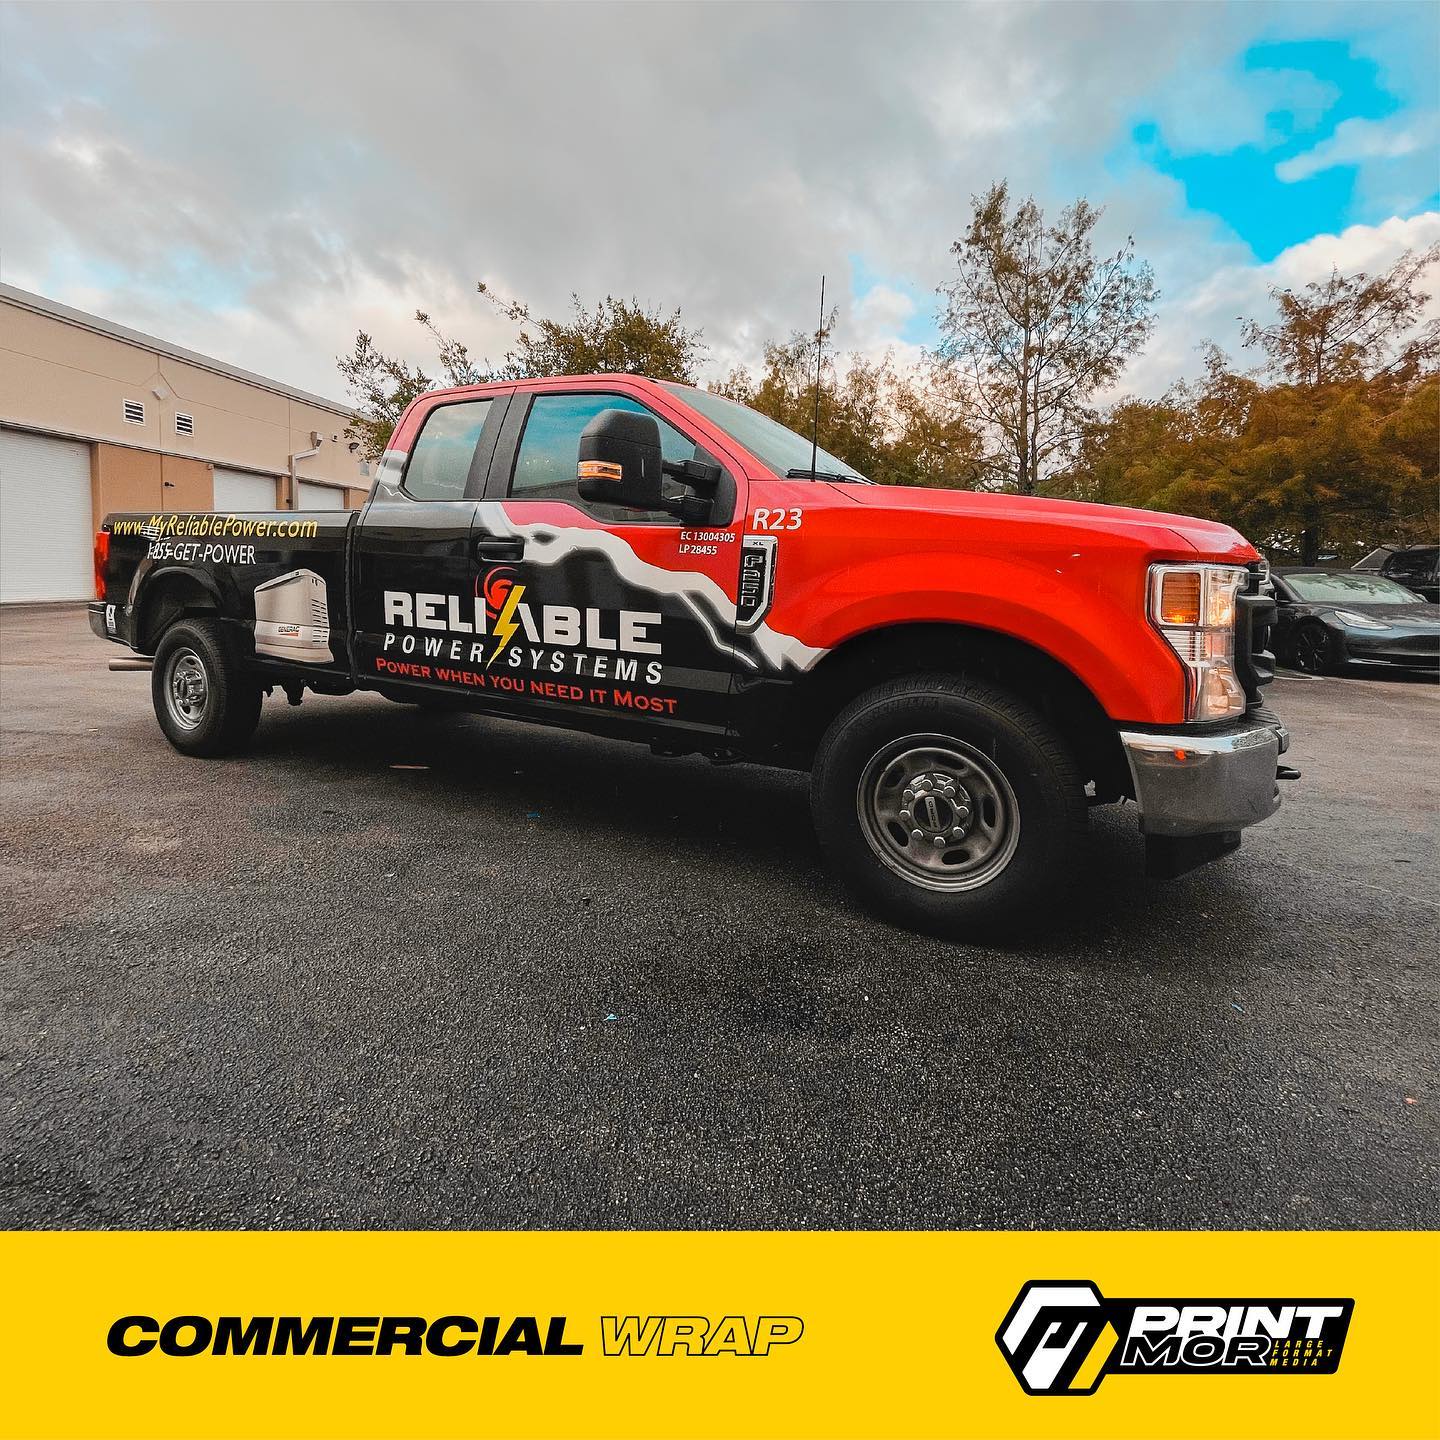 Printmor-Portfolio-Image-Reliable-Power-Systems-F250-Pickup-Truck-Commercial-Wrap